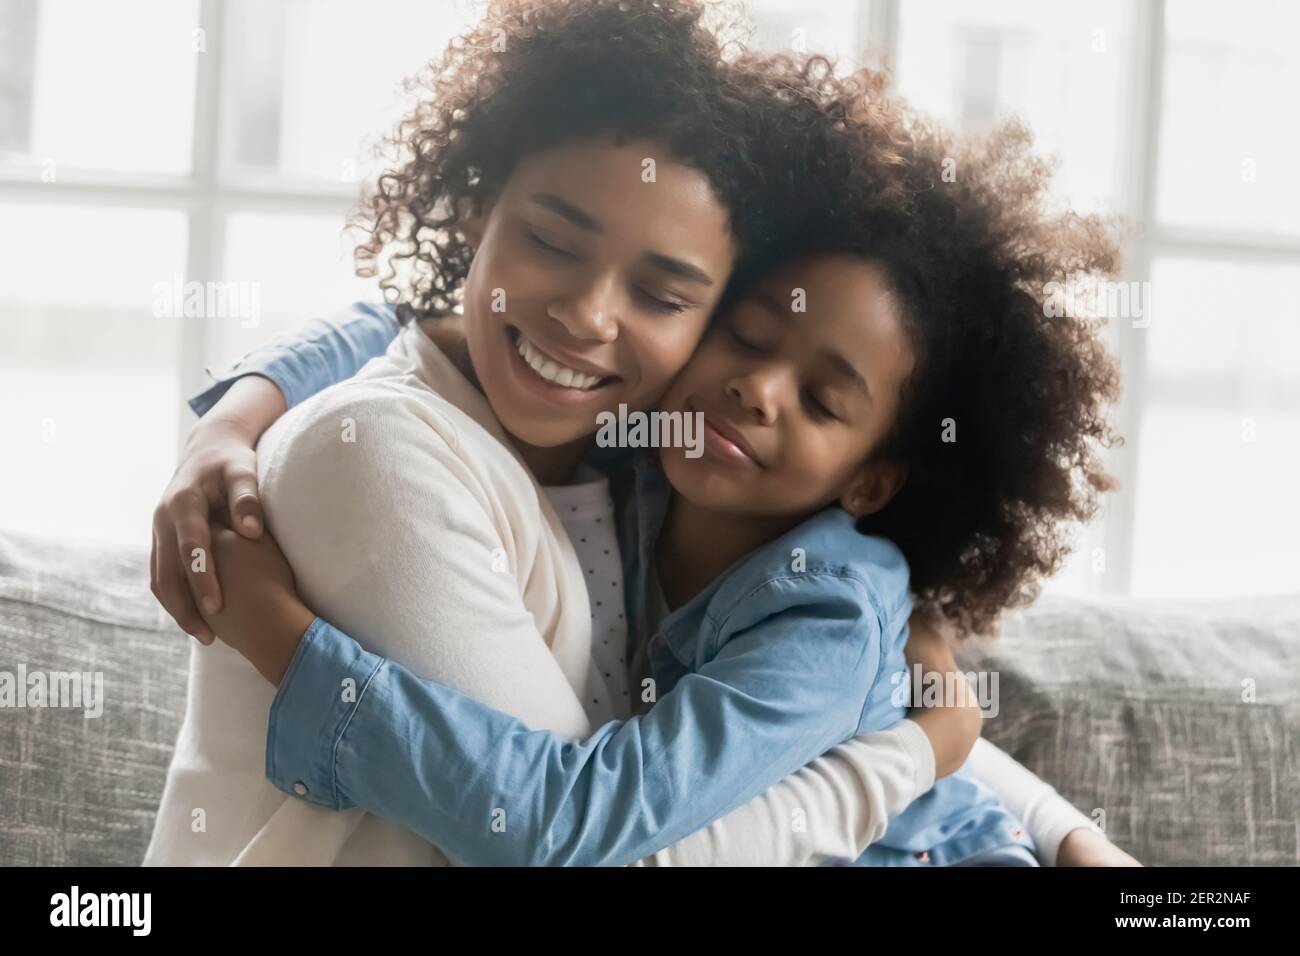 Portrait of happy mom with shut eyes embracing daughter girl Stock Photo